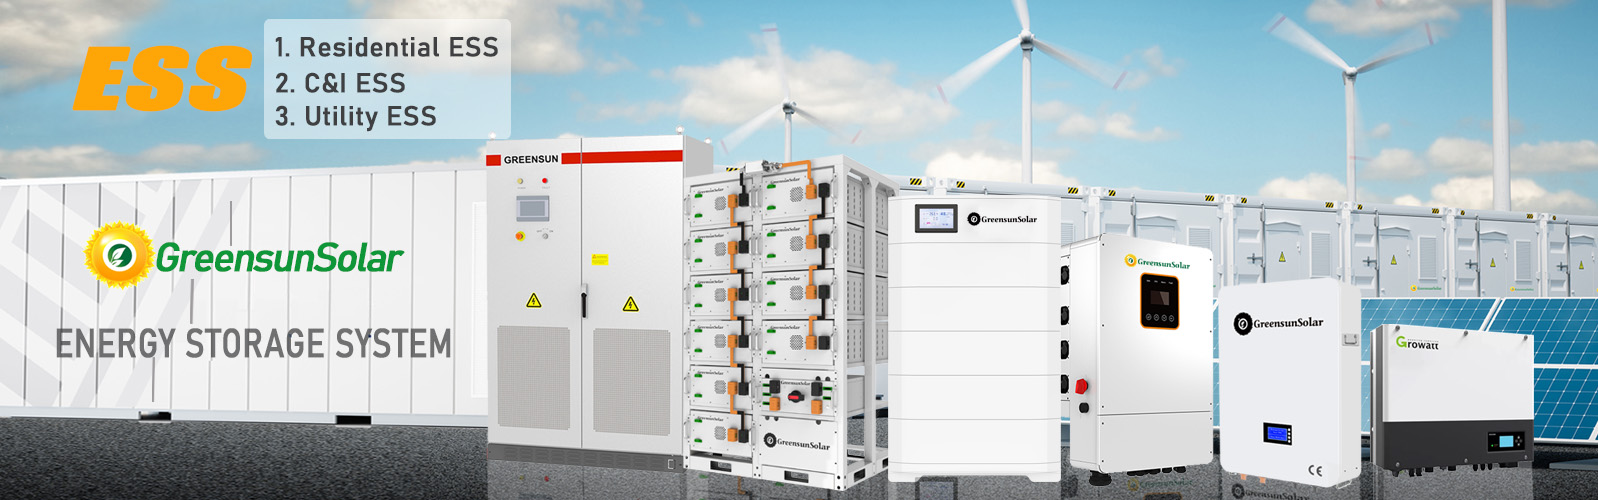 BESS Energy Storage System Solutions